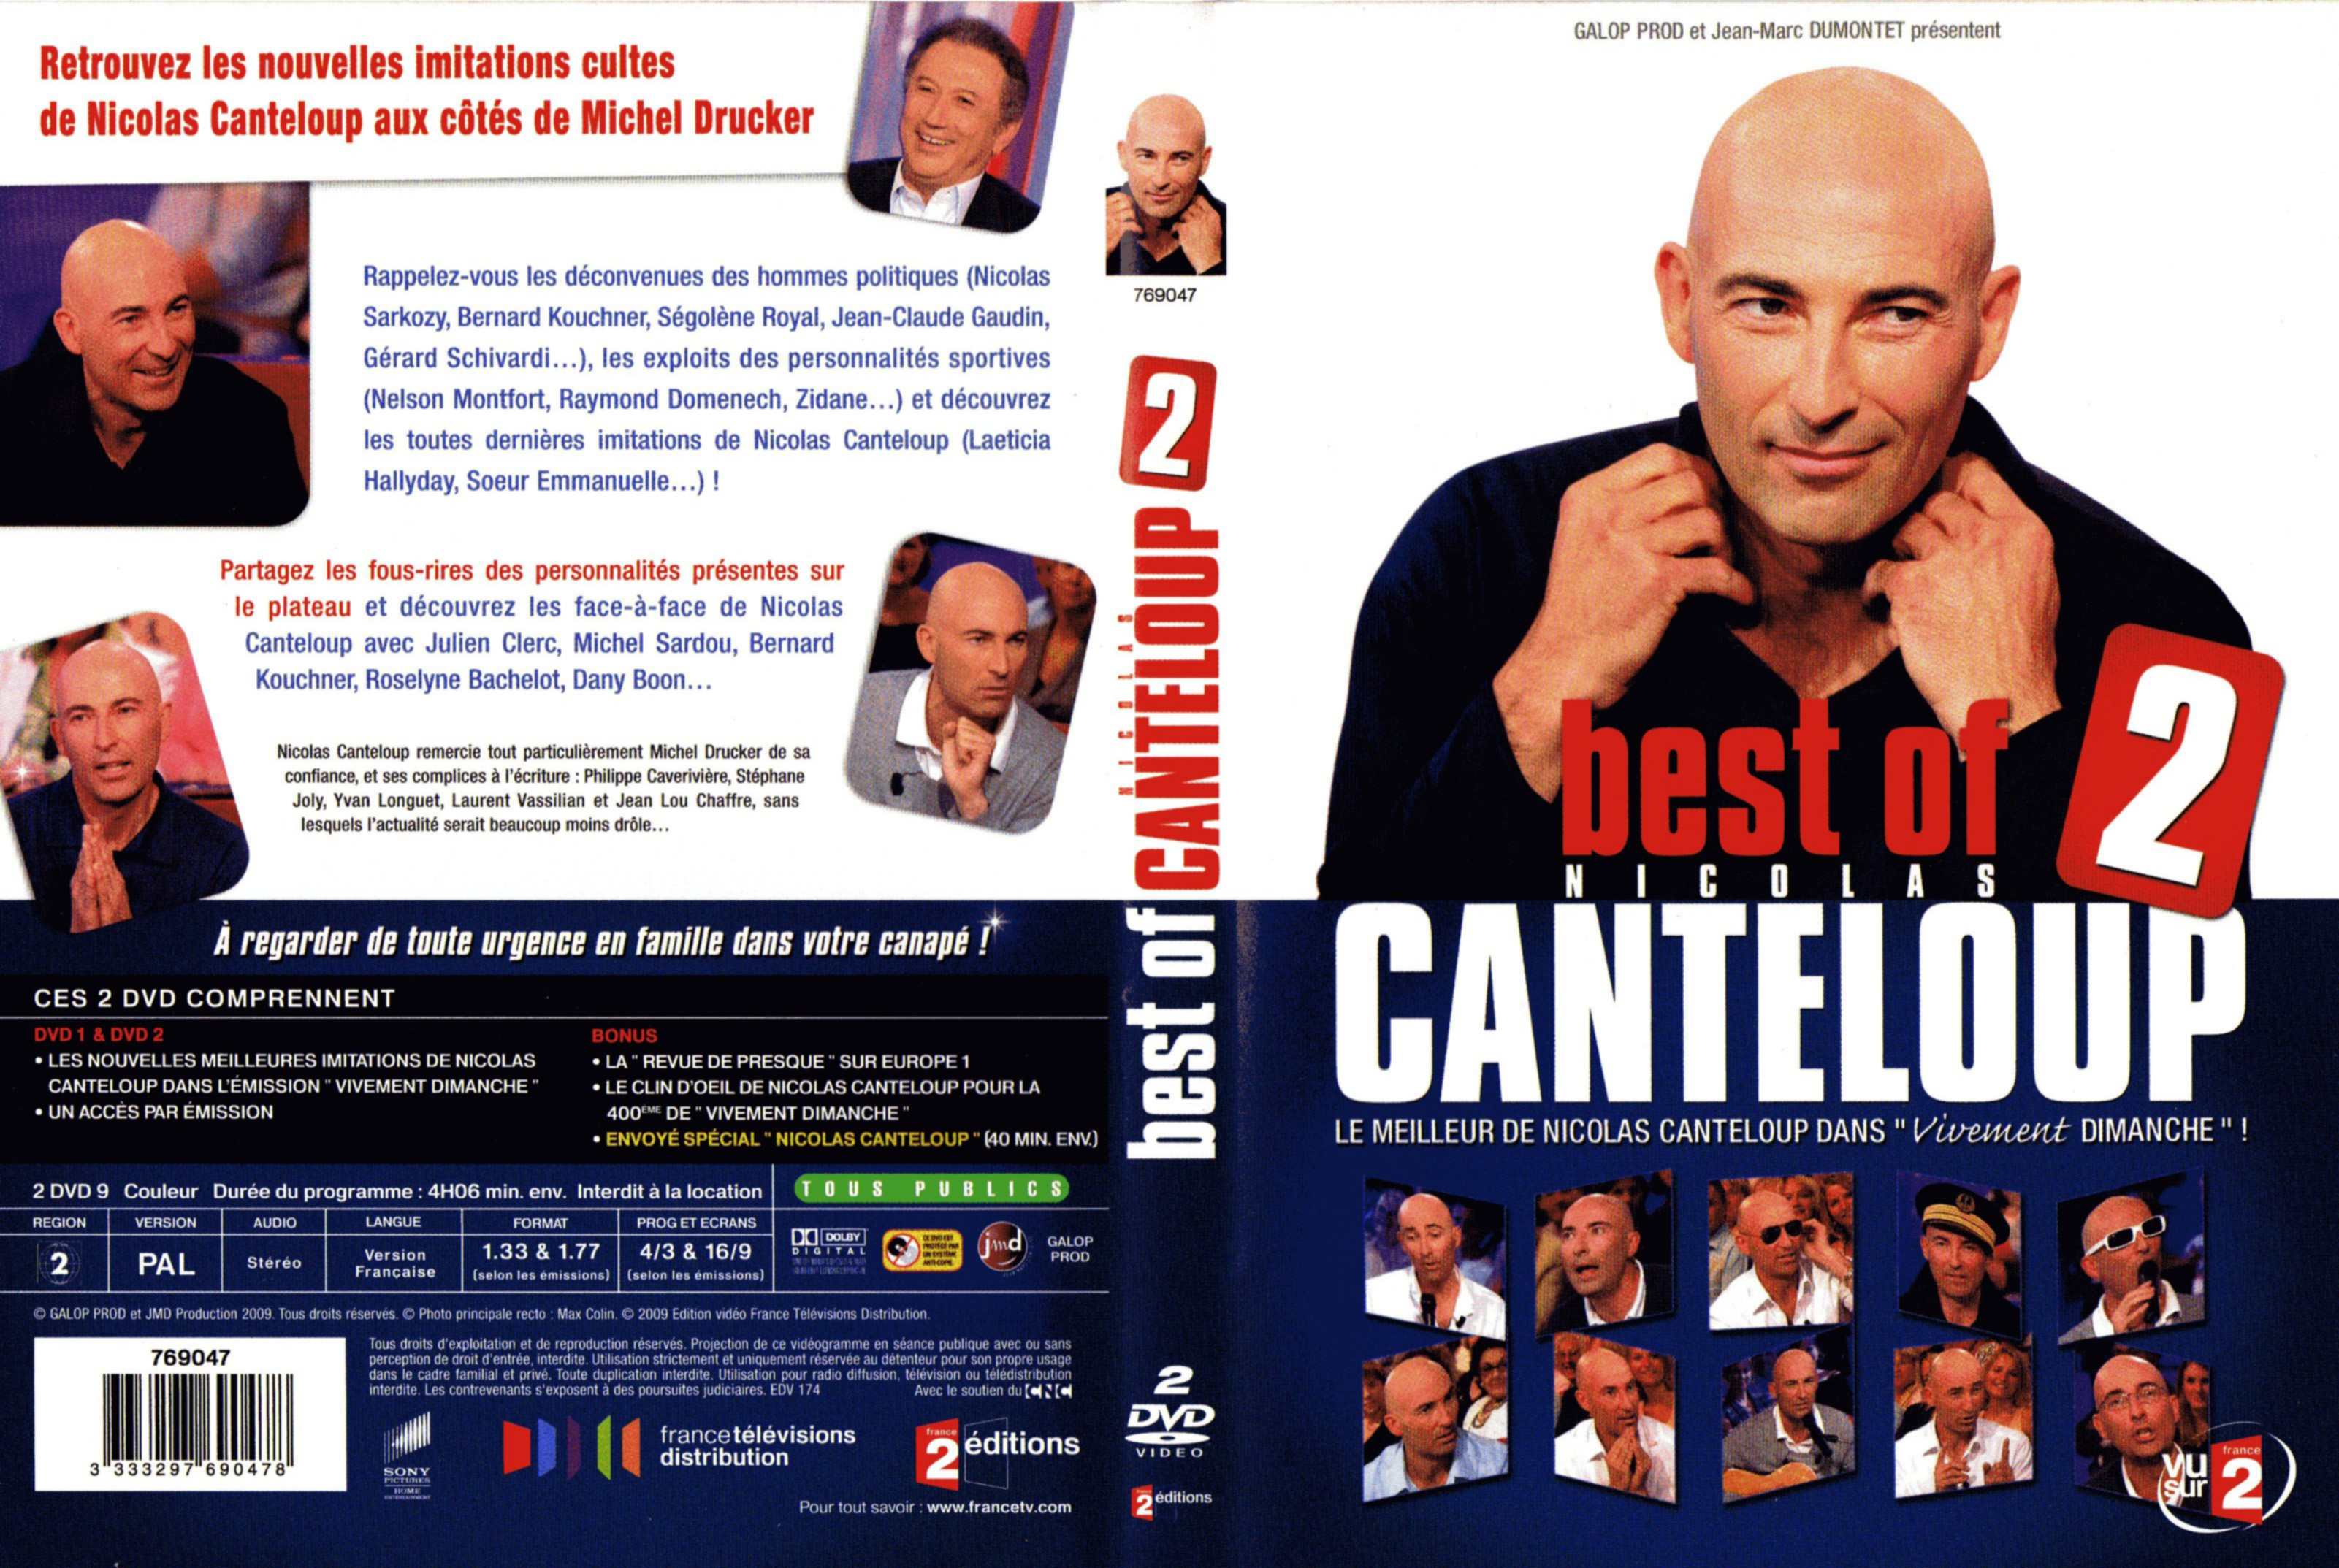 Jaquette DVD Nicolas canteloup best of 2